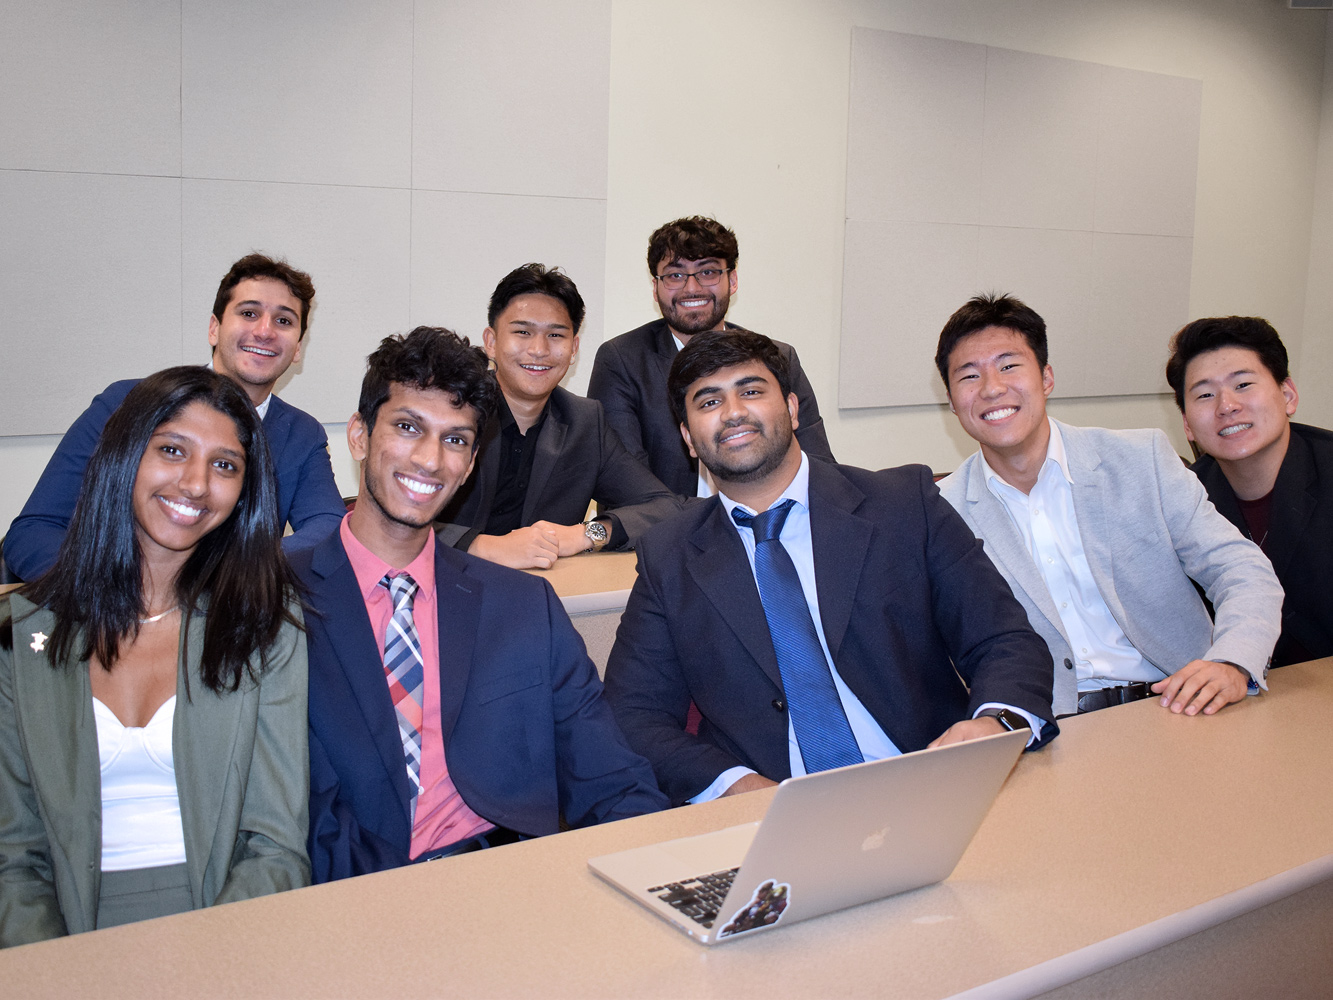 A diverse group of HPAO students dressed in formal business attire, in a conference room.